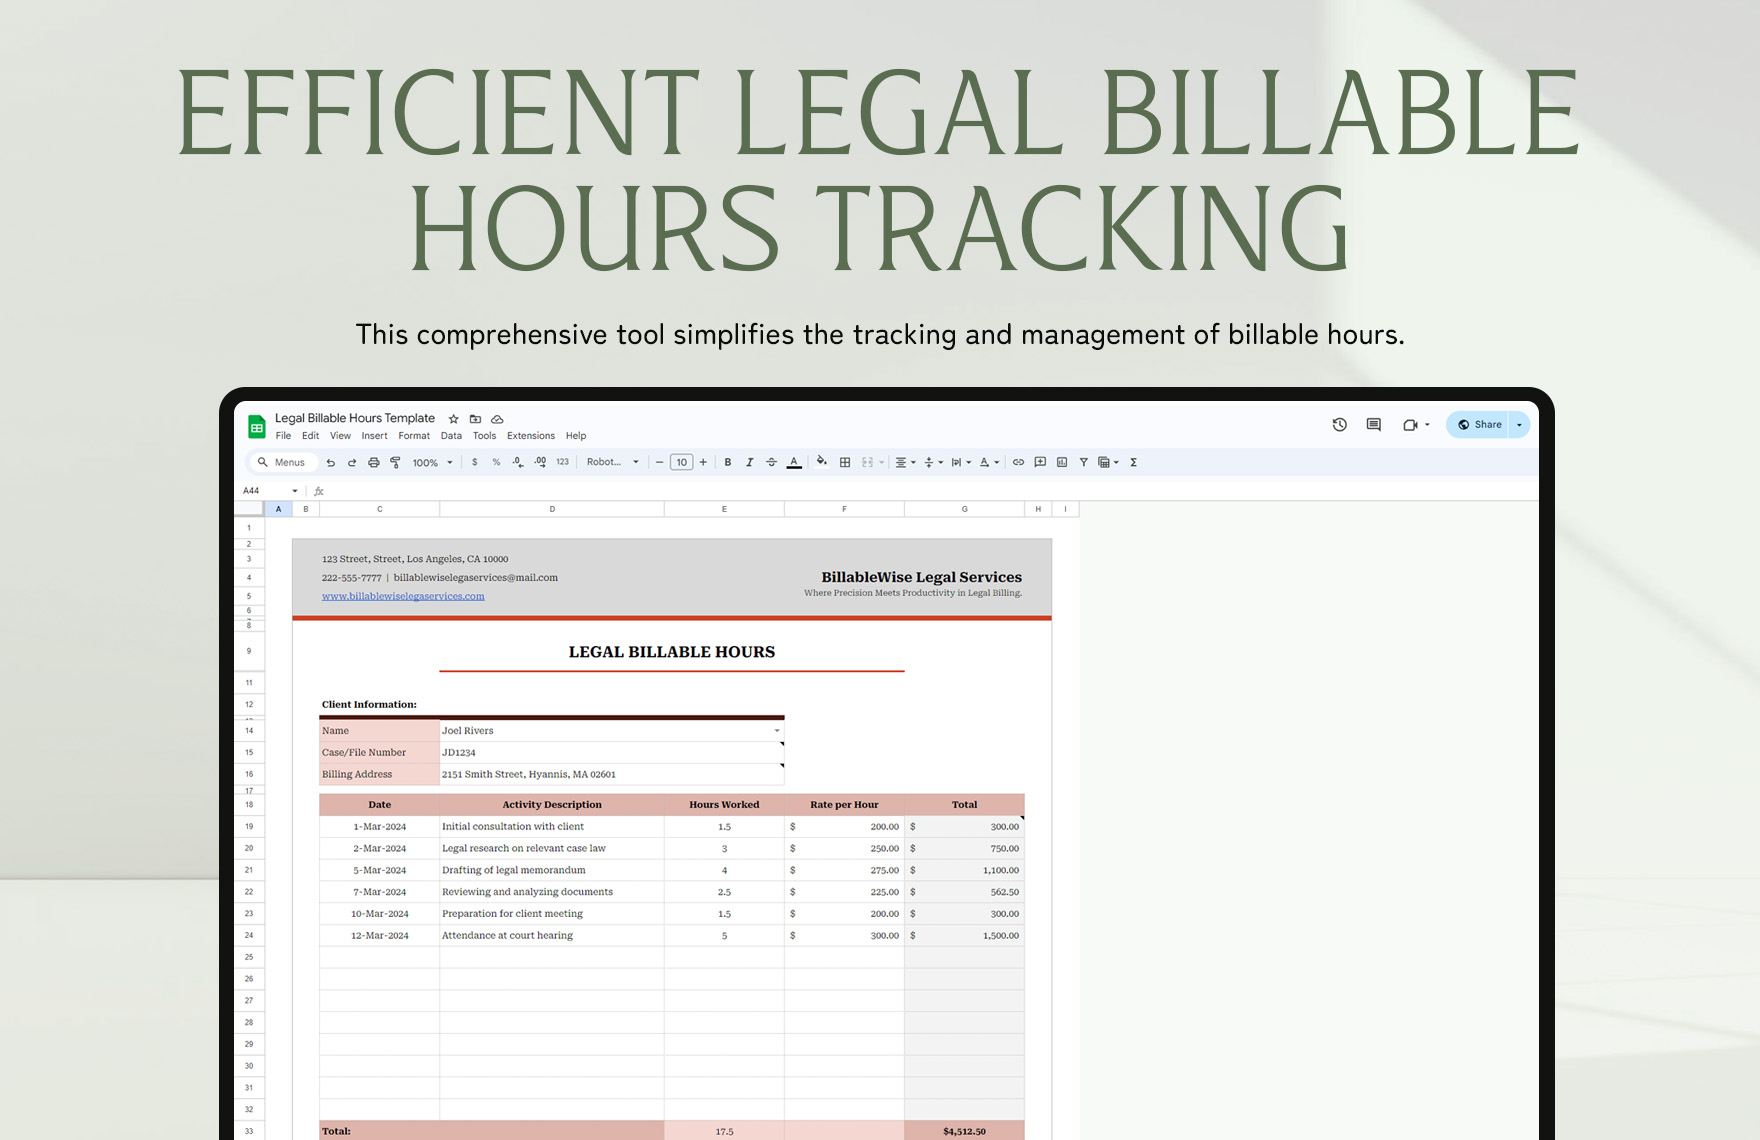 Legal Billable Hours Template